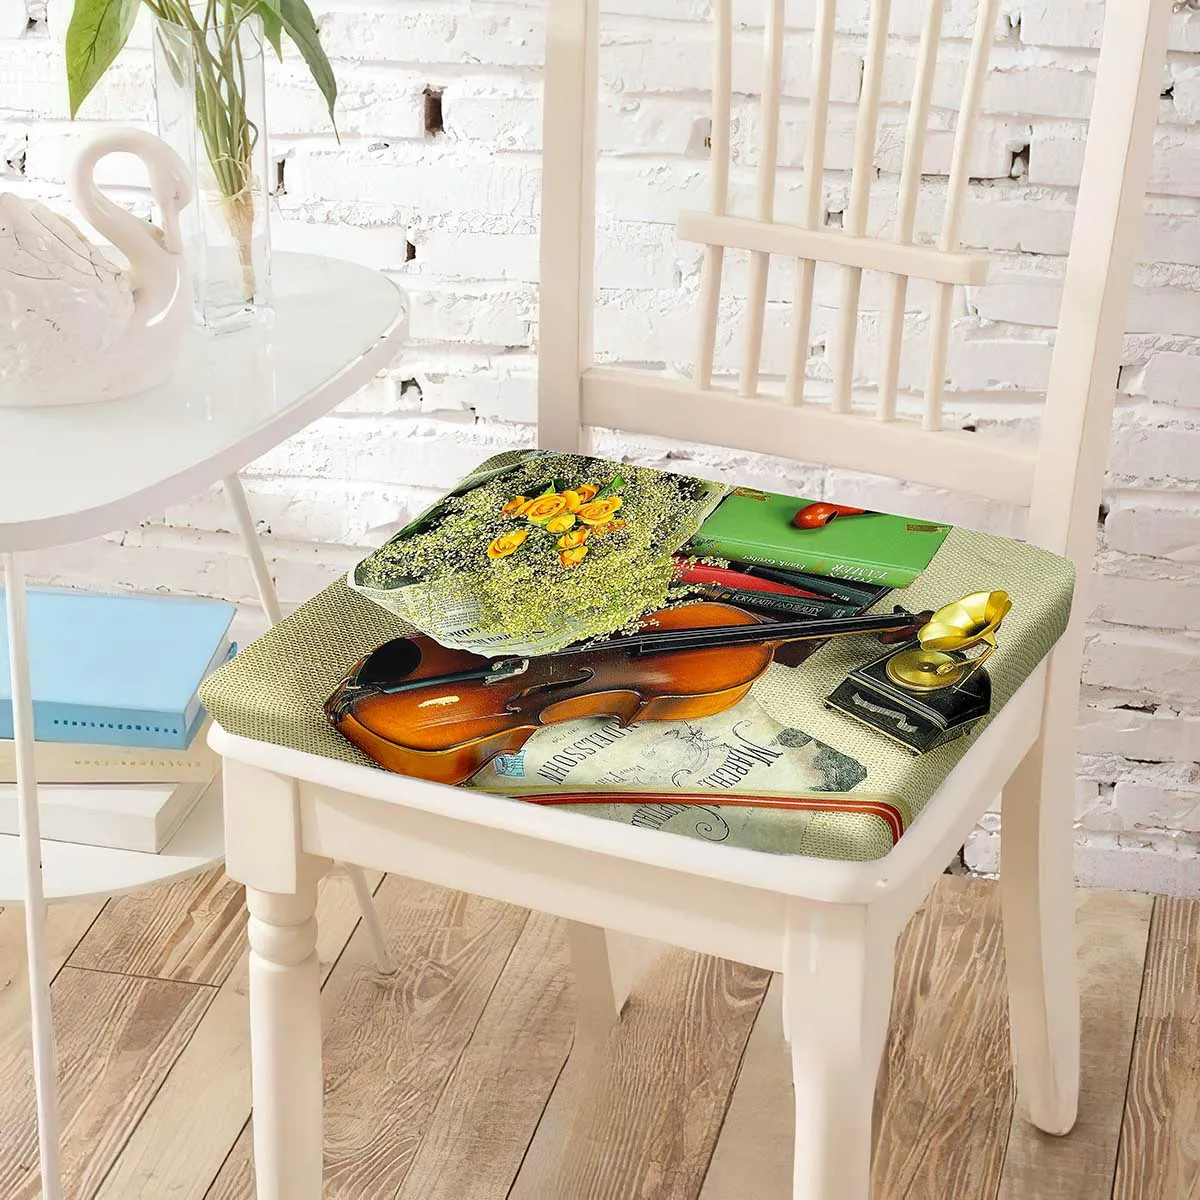 

Violin Flowers Art Printing Chair Cushion Square Cotton Sitting Cushions Soft Comfortable Chairs Pad for RV Vacation Home Decor